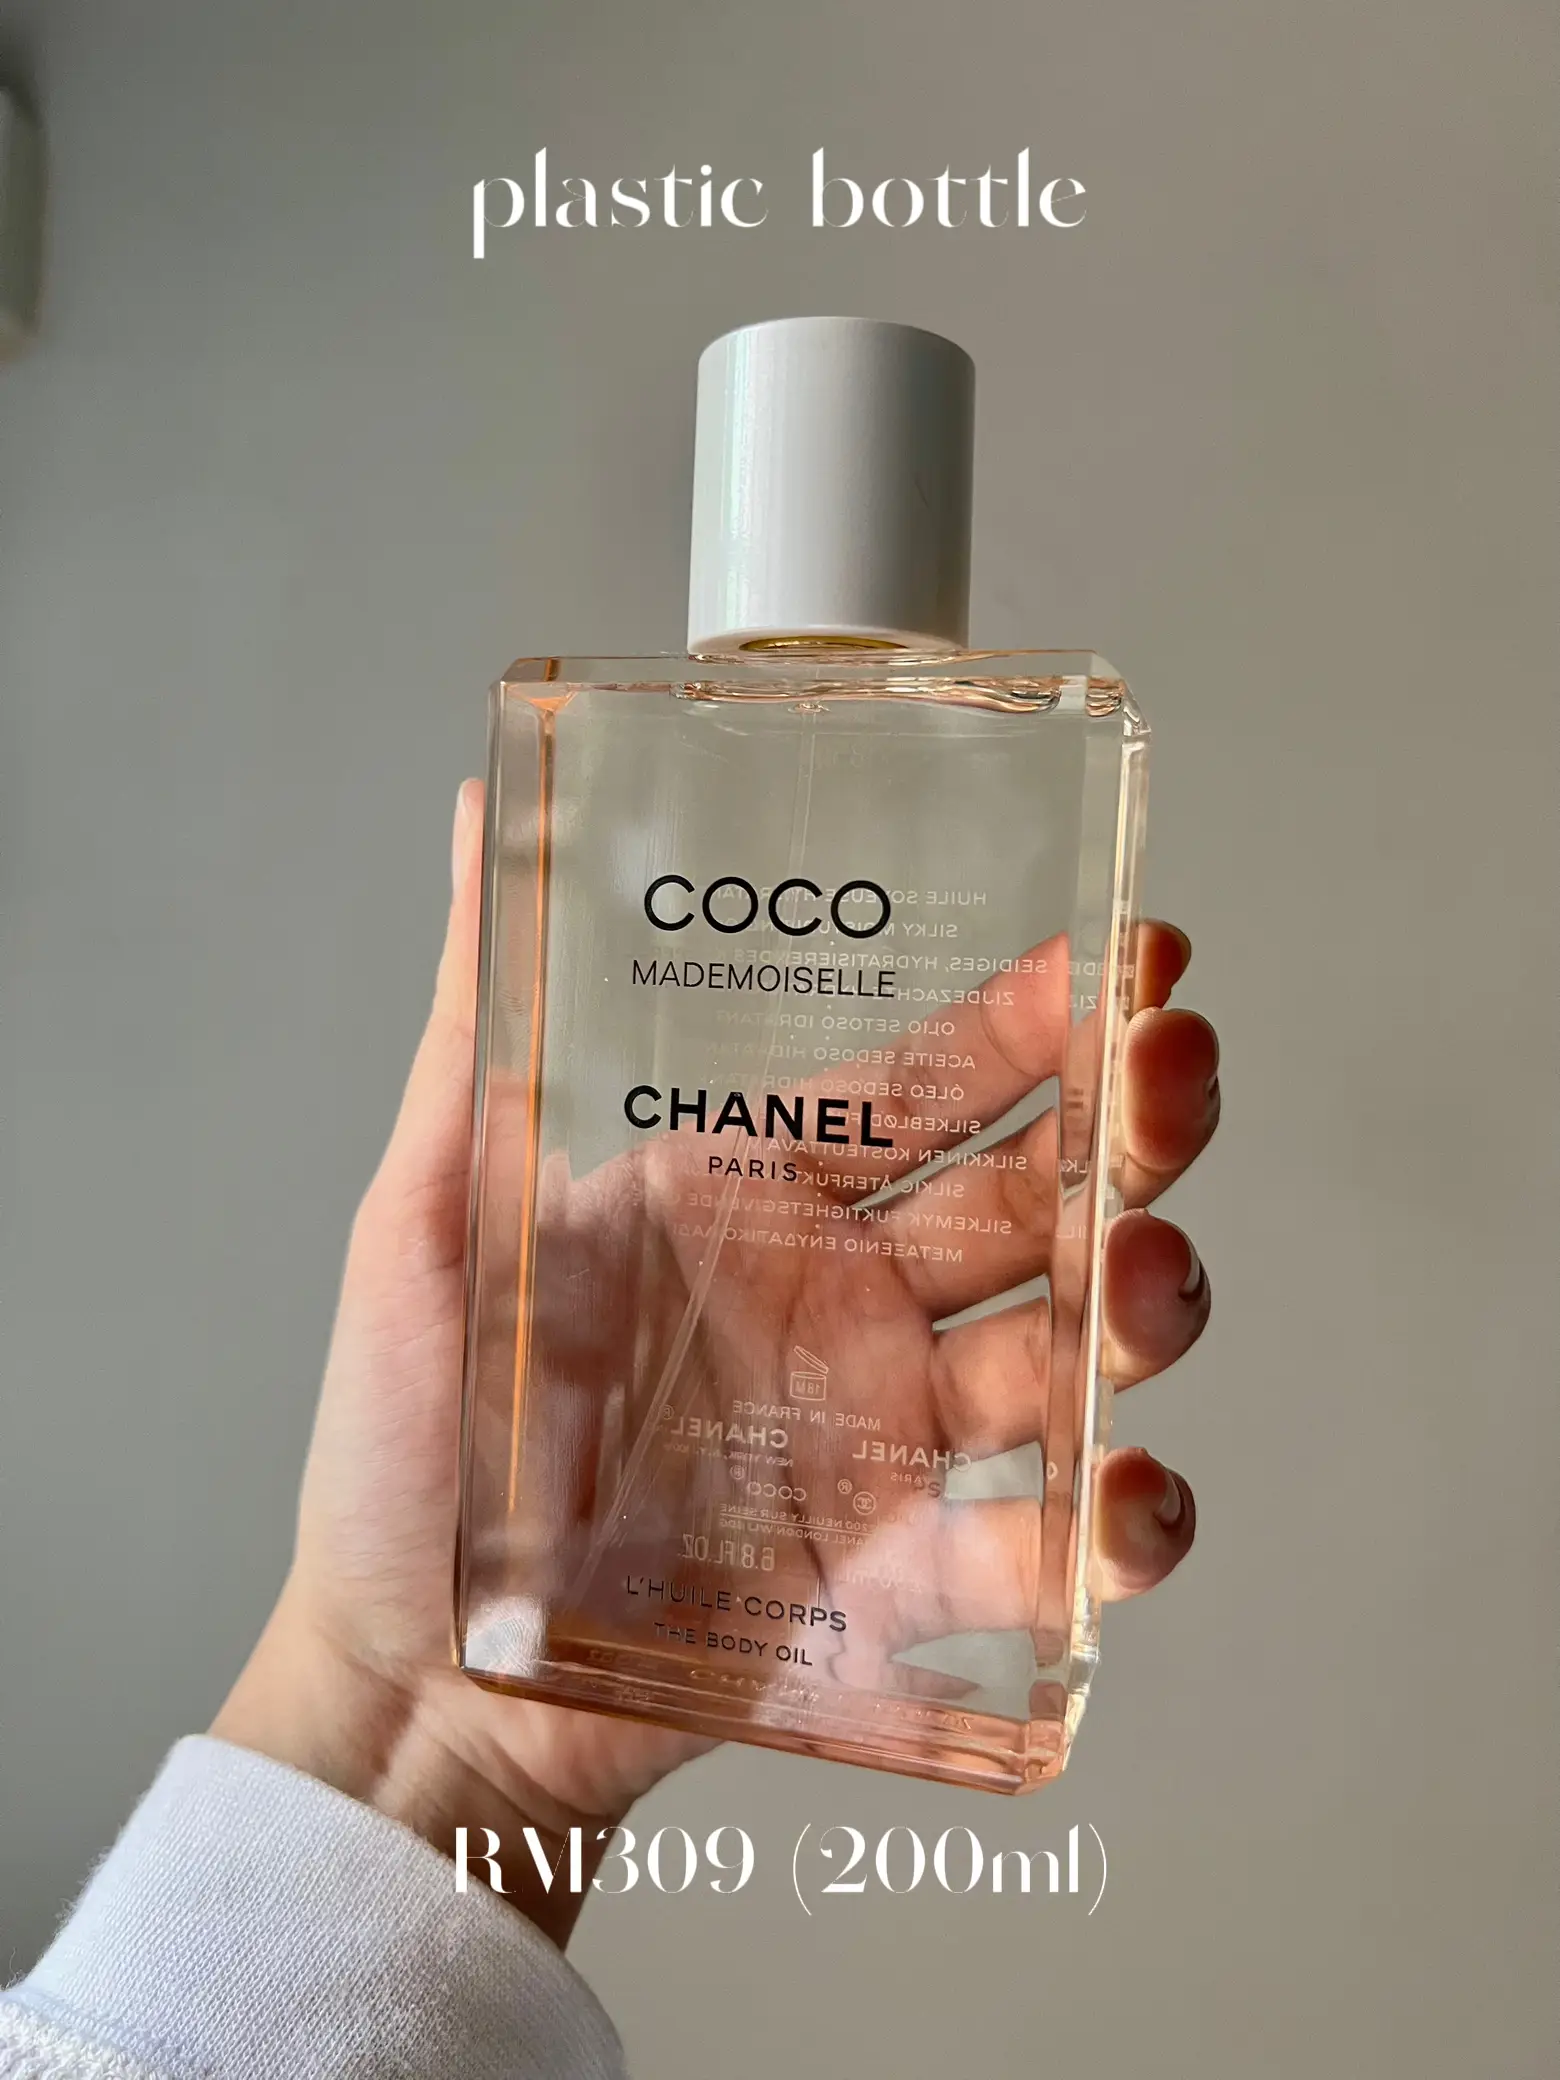 mademoiselle coco chanel body oil for women